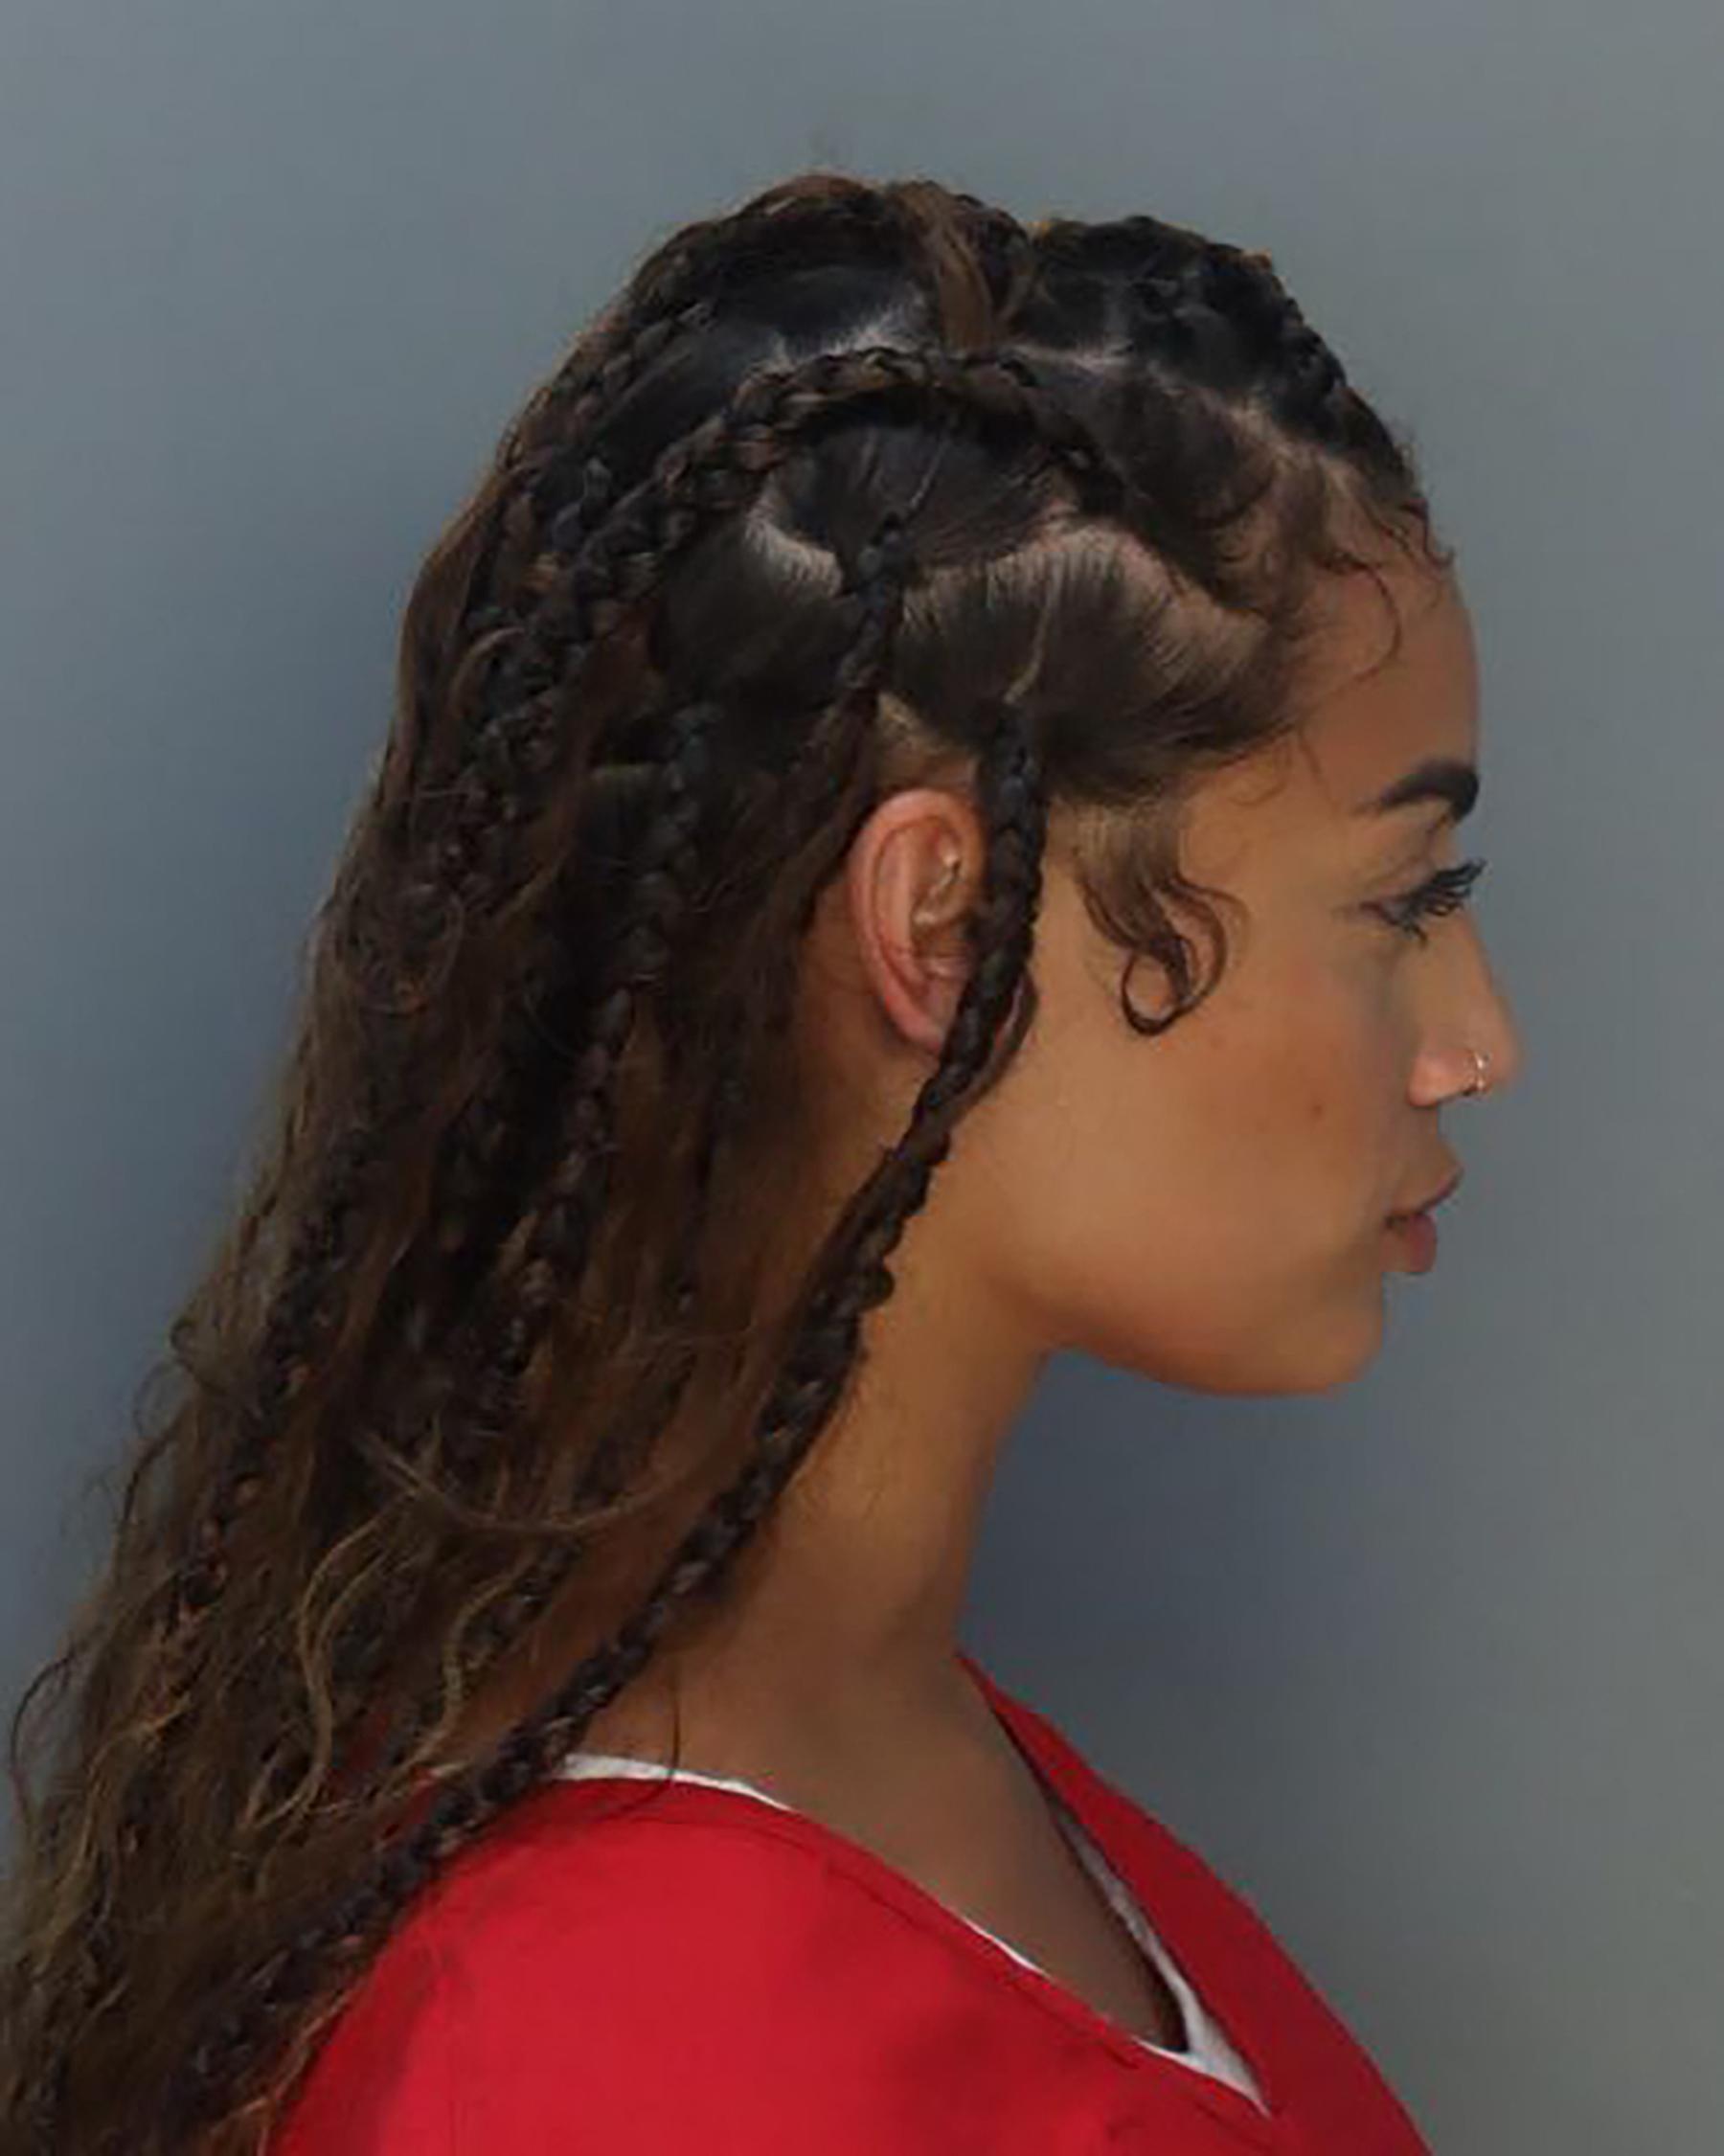 DaniLeigh arrested for alleged DUI hit and run in Miami Beach